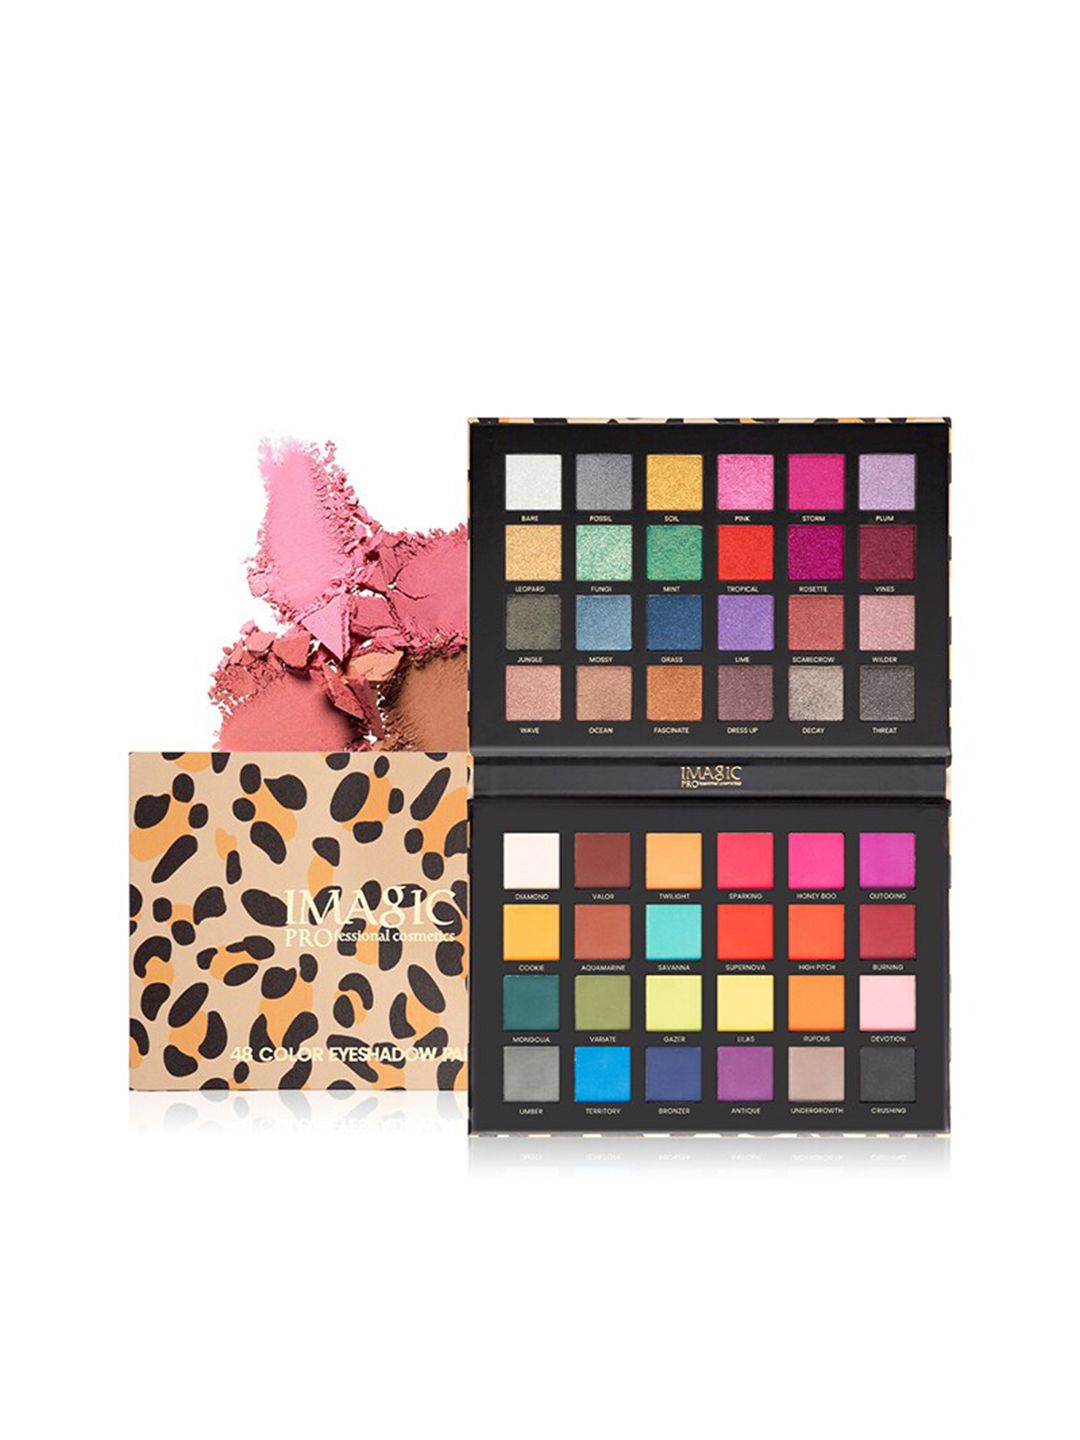 IMAGIC Professional Cosmetics 48 Colors Eyeshadow Pallette - Shade EY345 Price in India